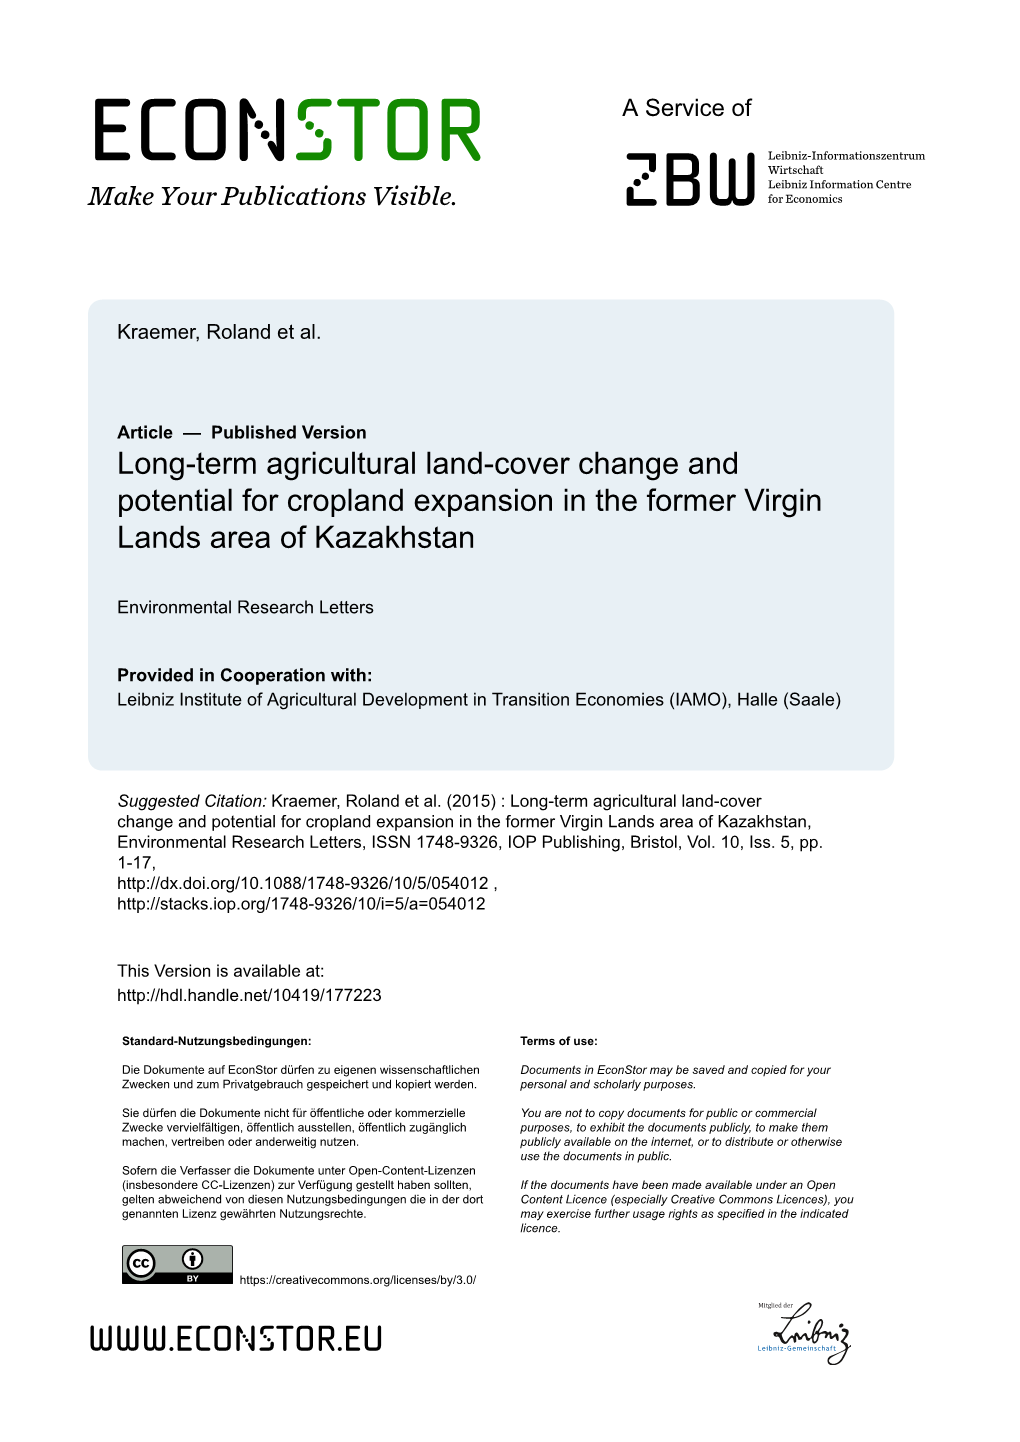 Long-Term Agricultural Land-Cover Change and Potential for Cropland Expansion in the Former Virgin Lands Area of Kazakhstan